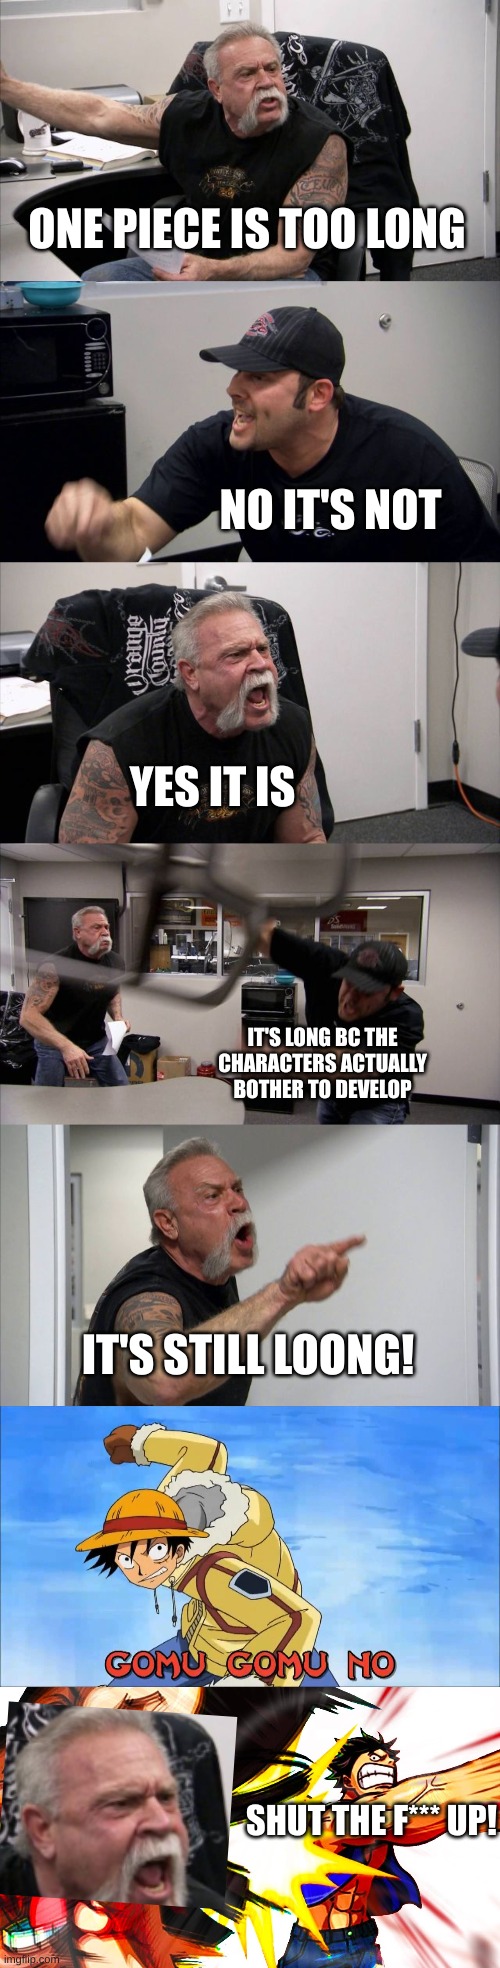 One piece is not long enough | ONE PIECE IS TOO LONG; NO IT'S NOT; YES IT IS; IT'S LONG BC THE CHARACTERS ACTUALLY BOTHER TO DEVELOP; IT'S STILL LOONG! SHUT THE F*** UP! | image tagged in memes,american chopper argument,one piece | made w/ Imgflip meme maker